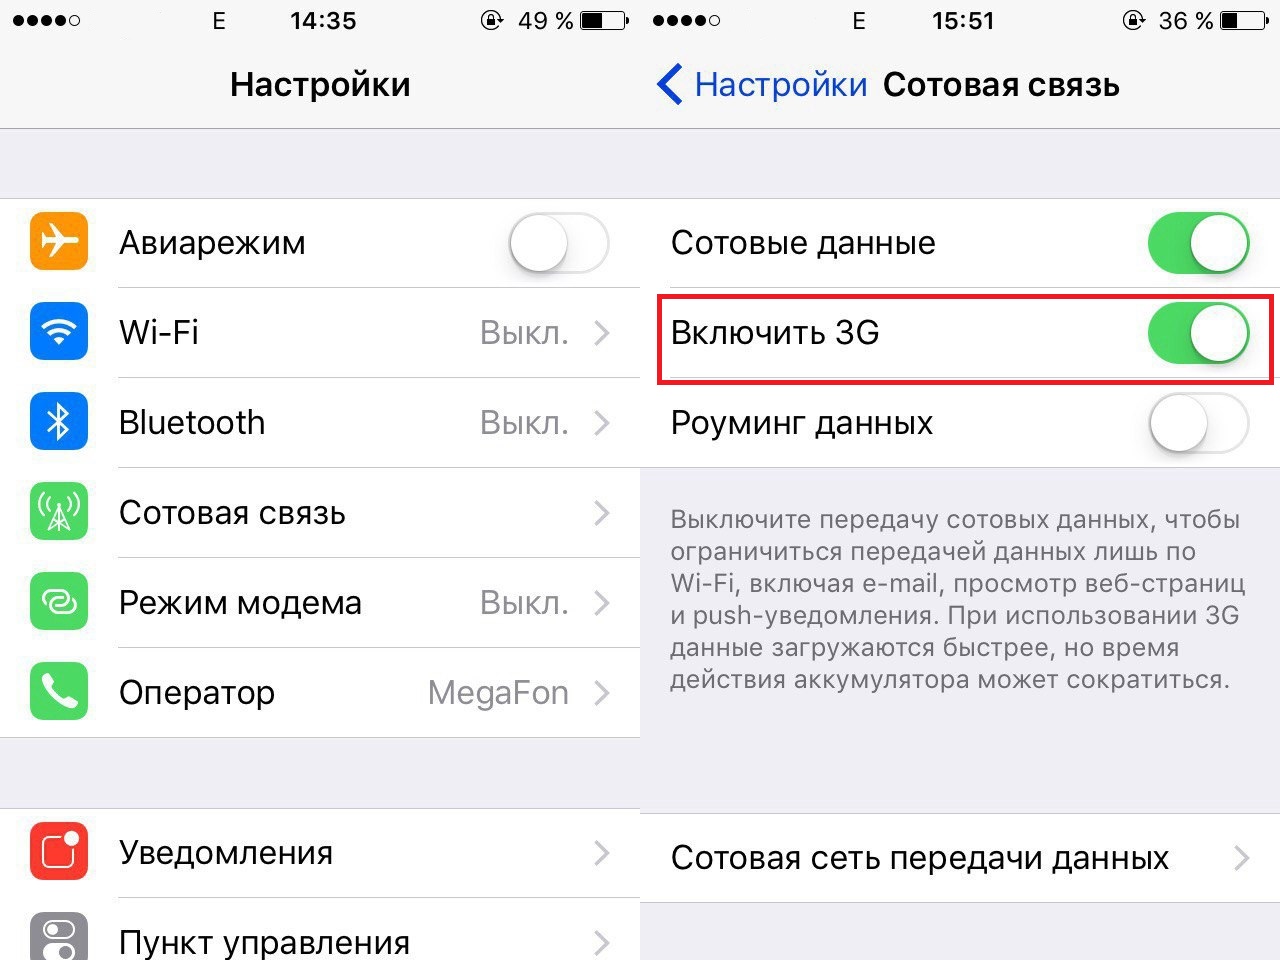 How to enable 3G on iPhone 4s 